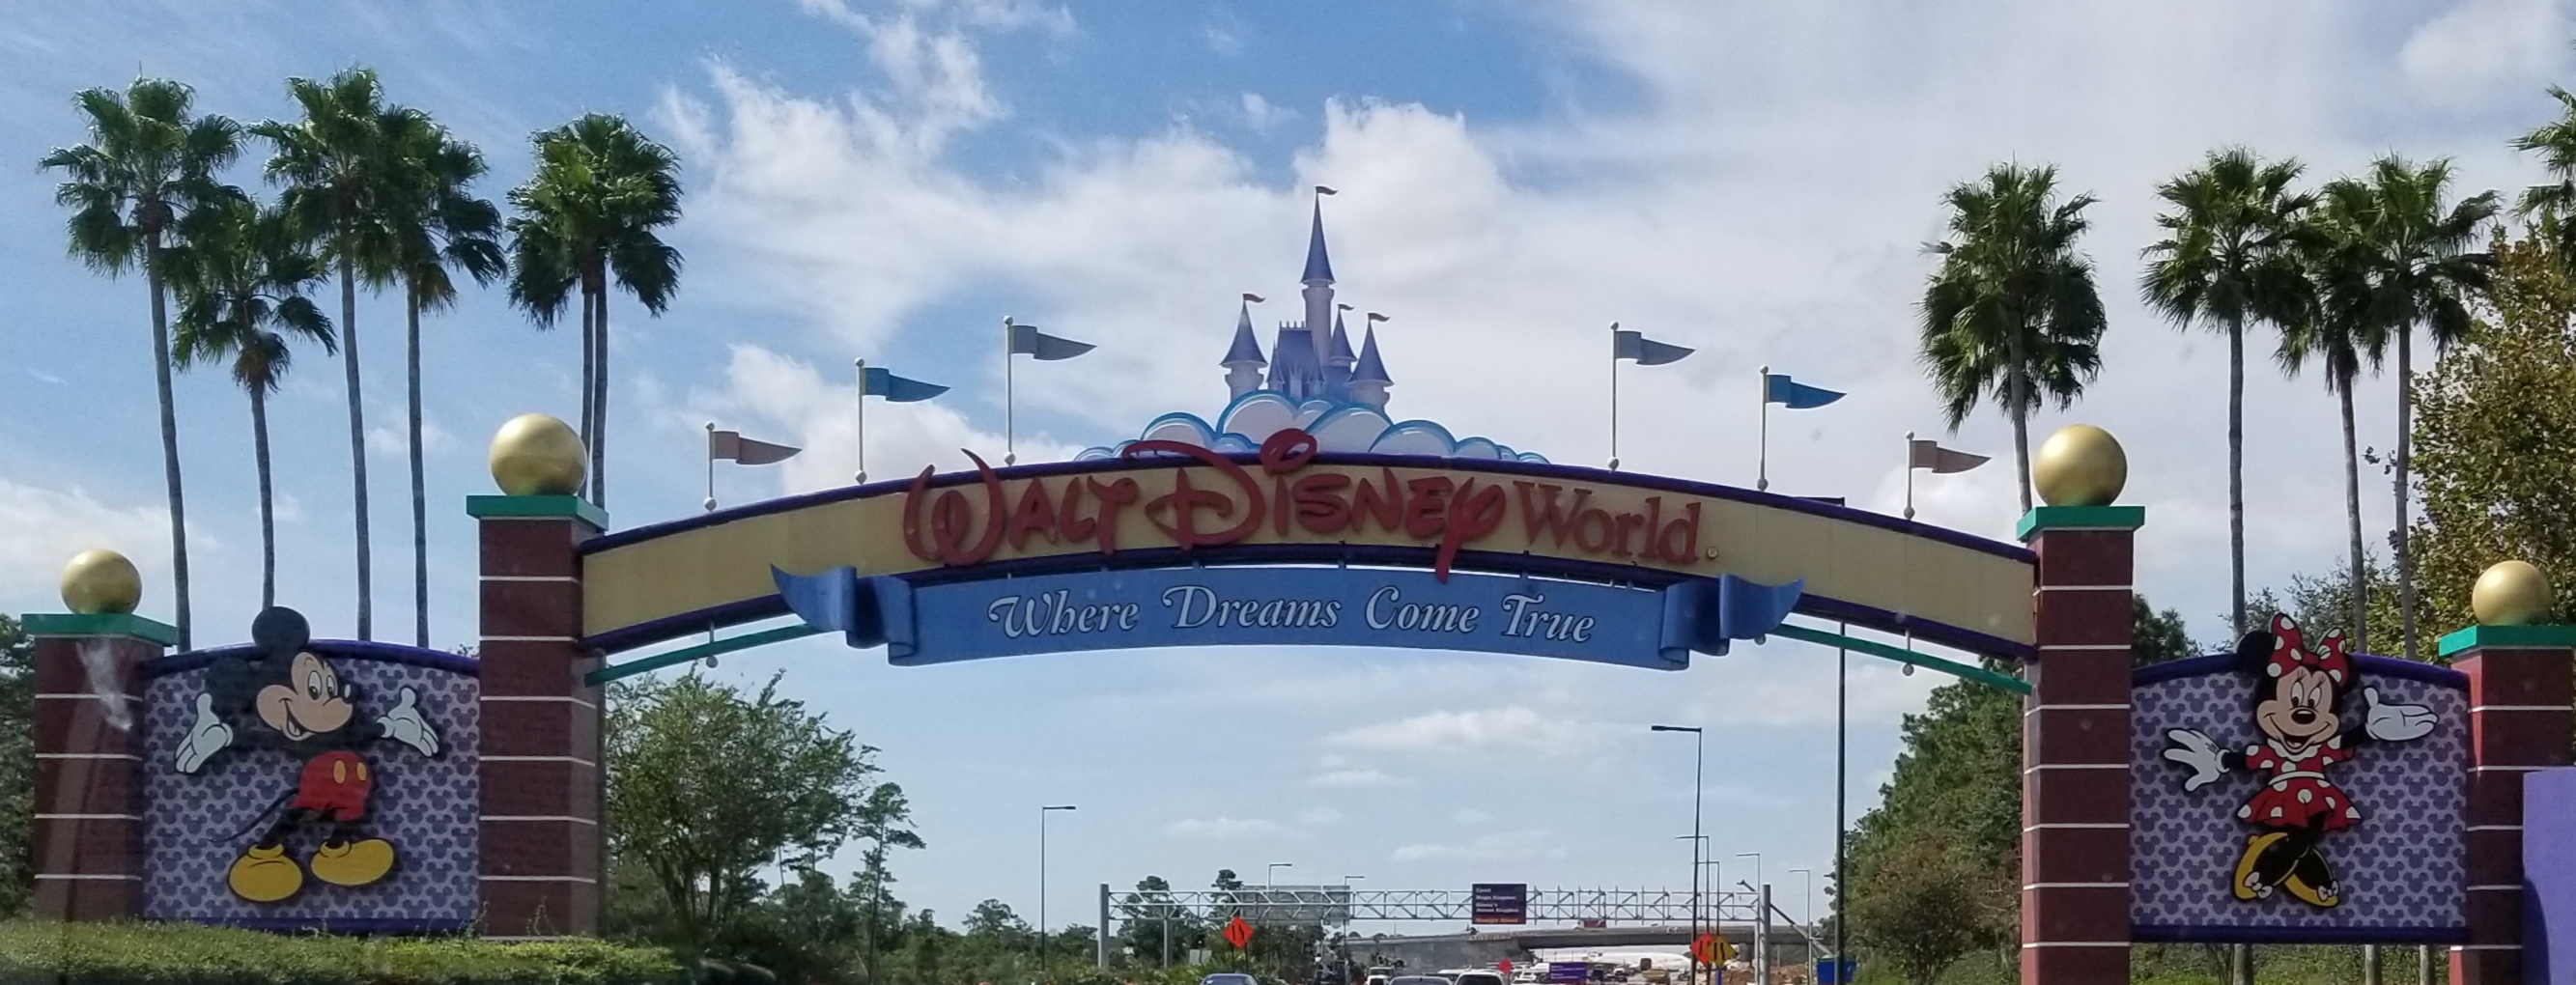 Look at What is New at Walt Disney World in 2019!!